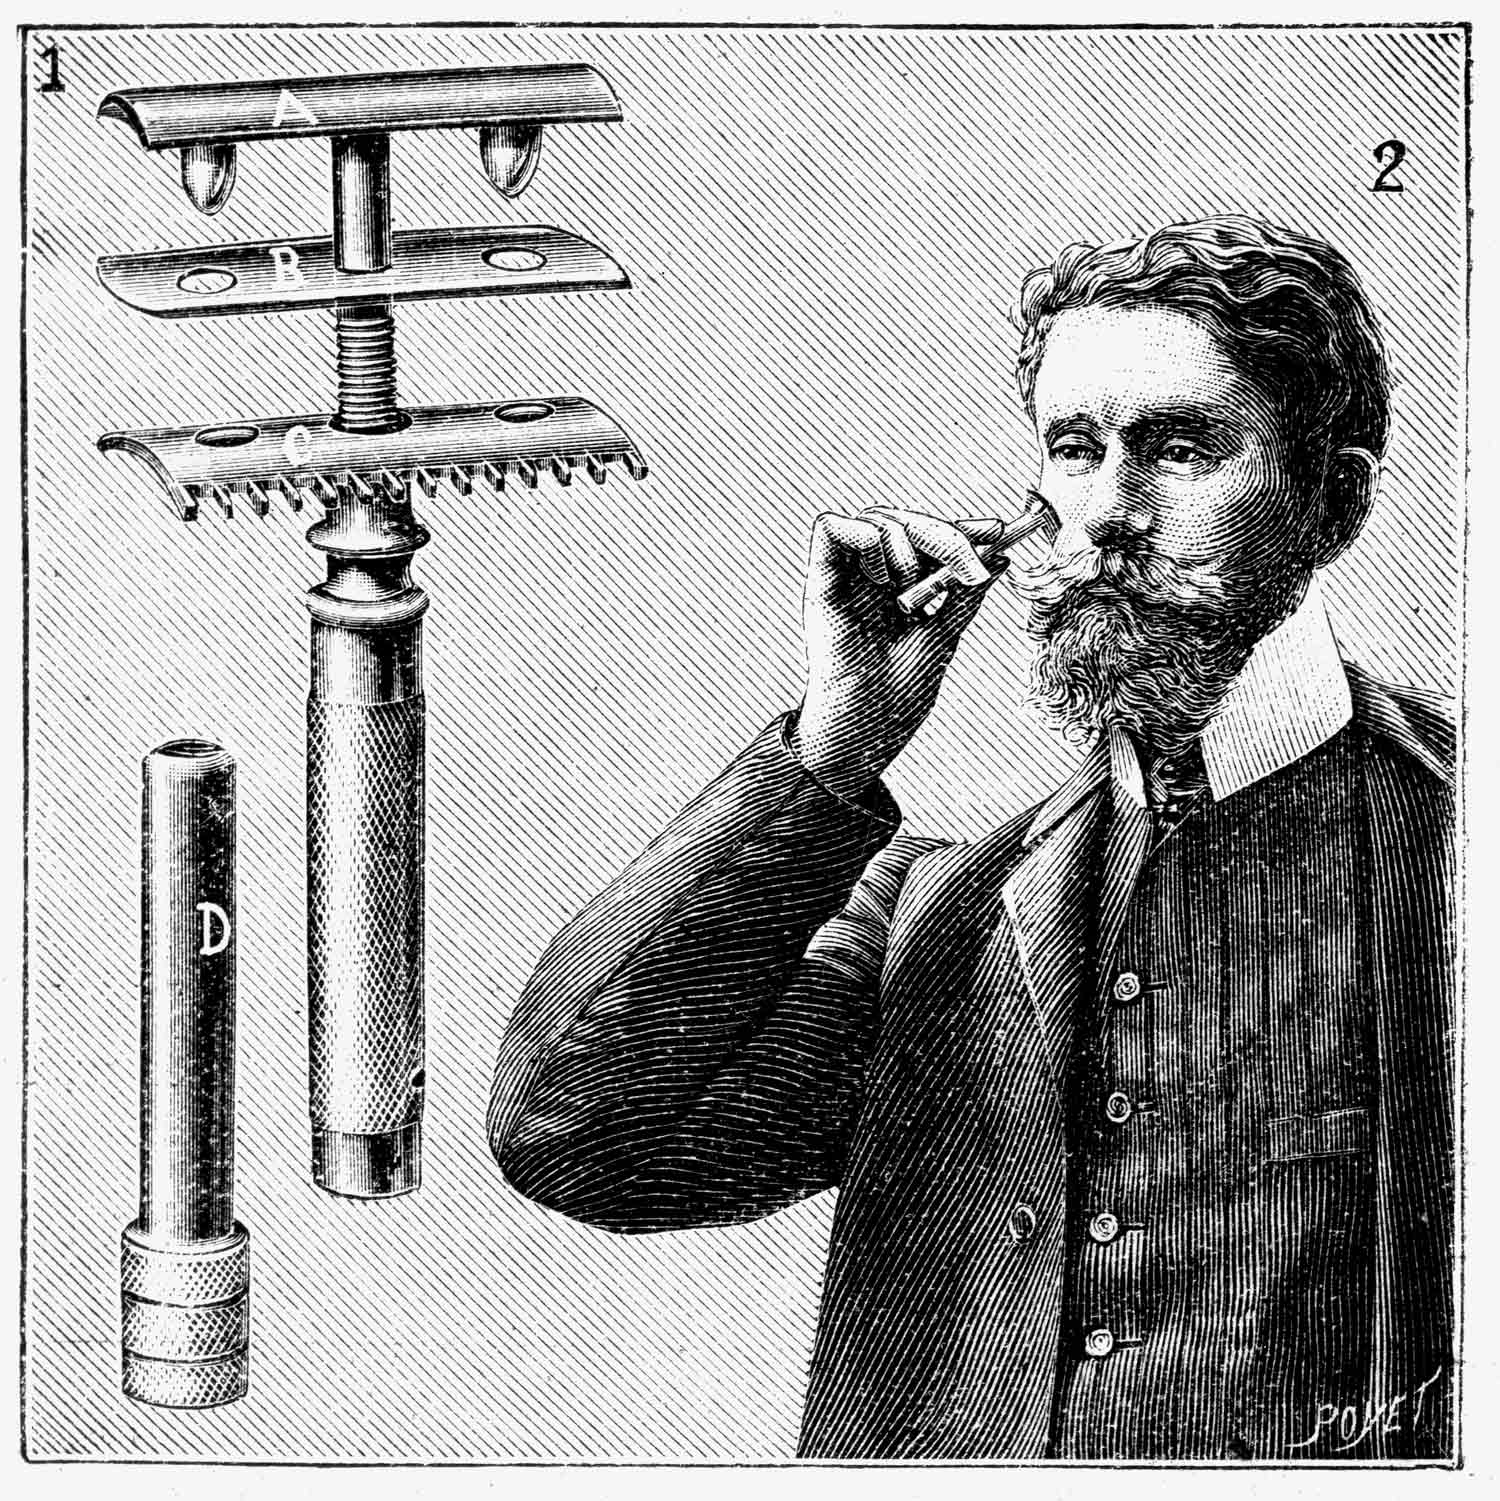 King Gillette's safety razor with replaceable blade, 1905.